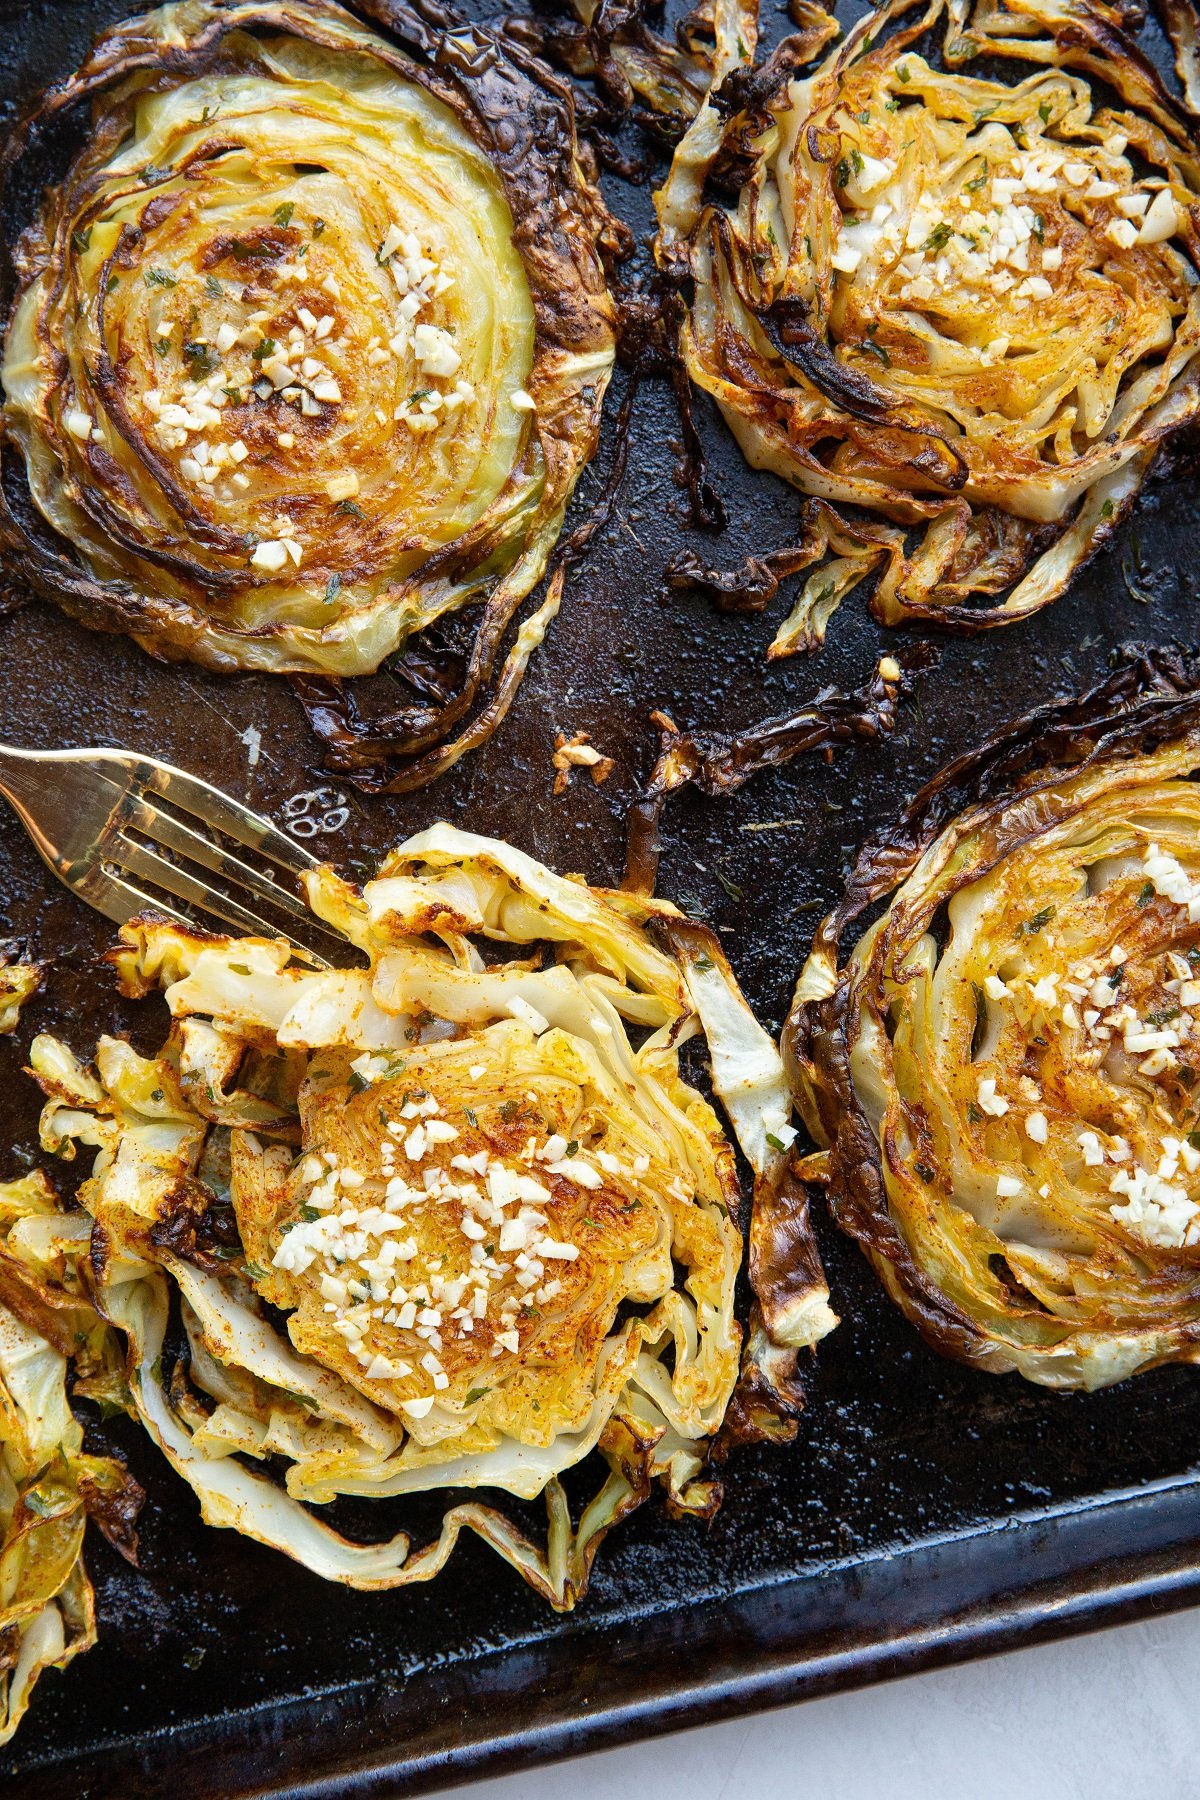 Baking sheet with roasted cabbage steaks fresh out of the oven.